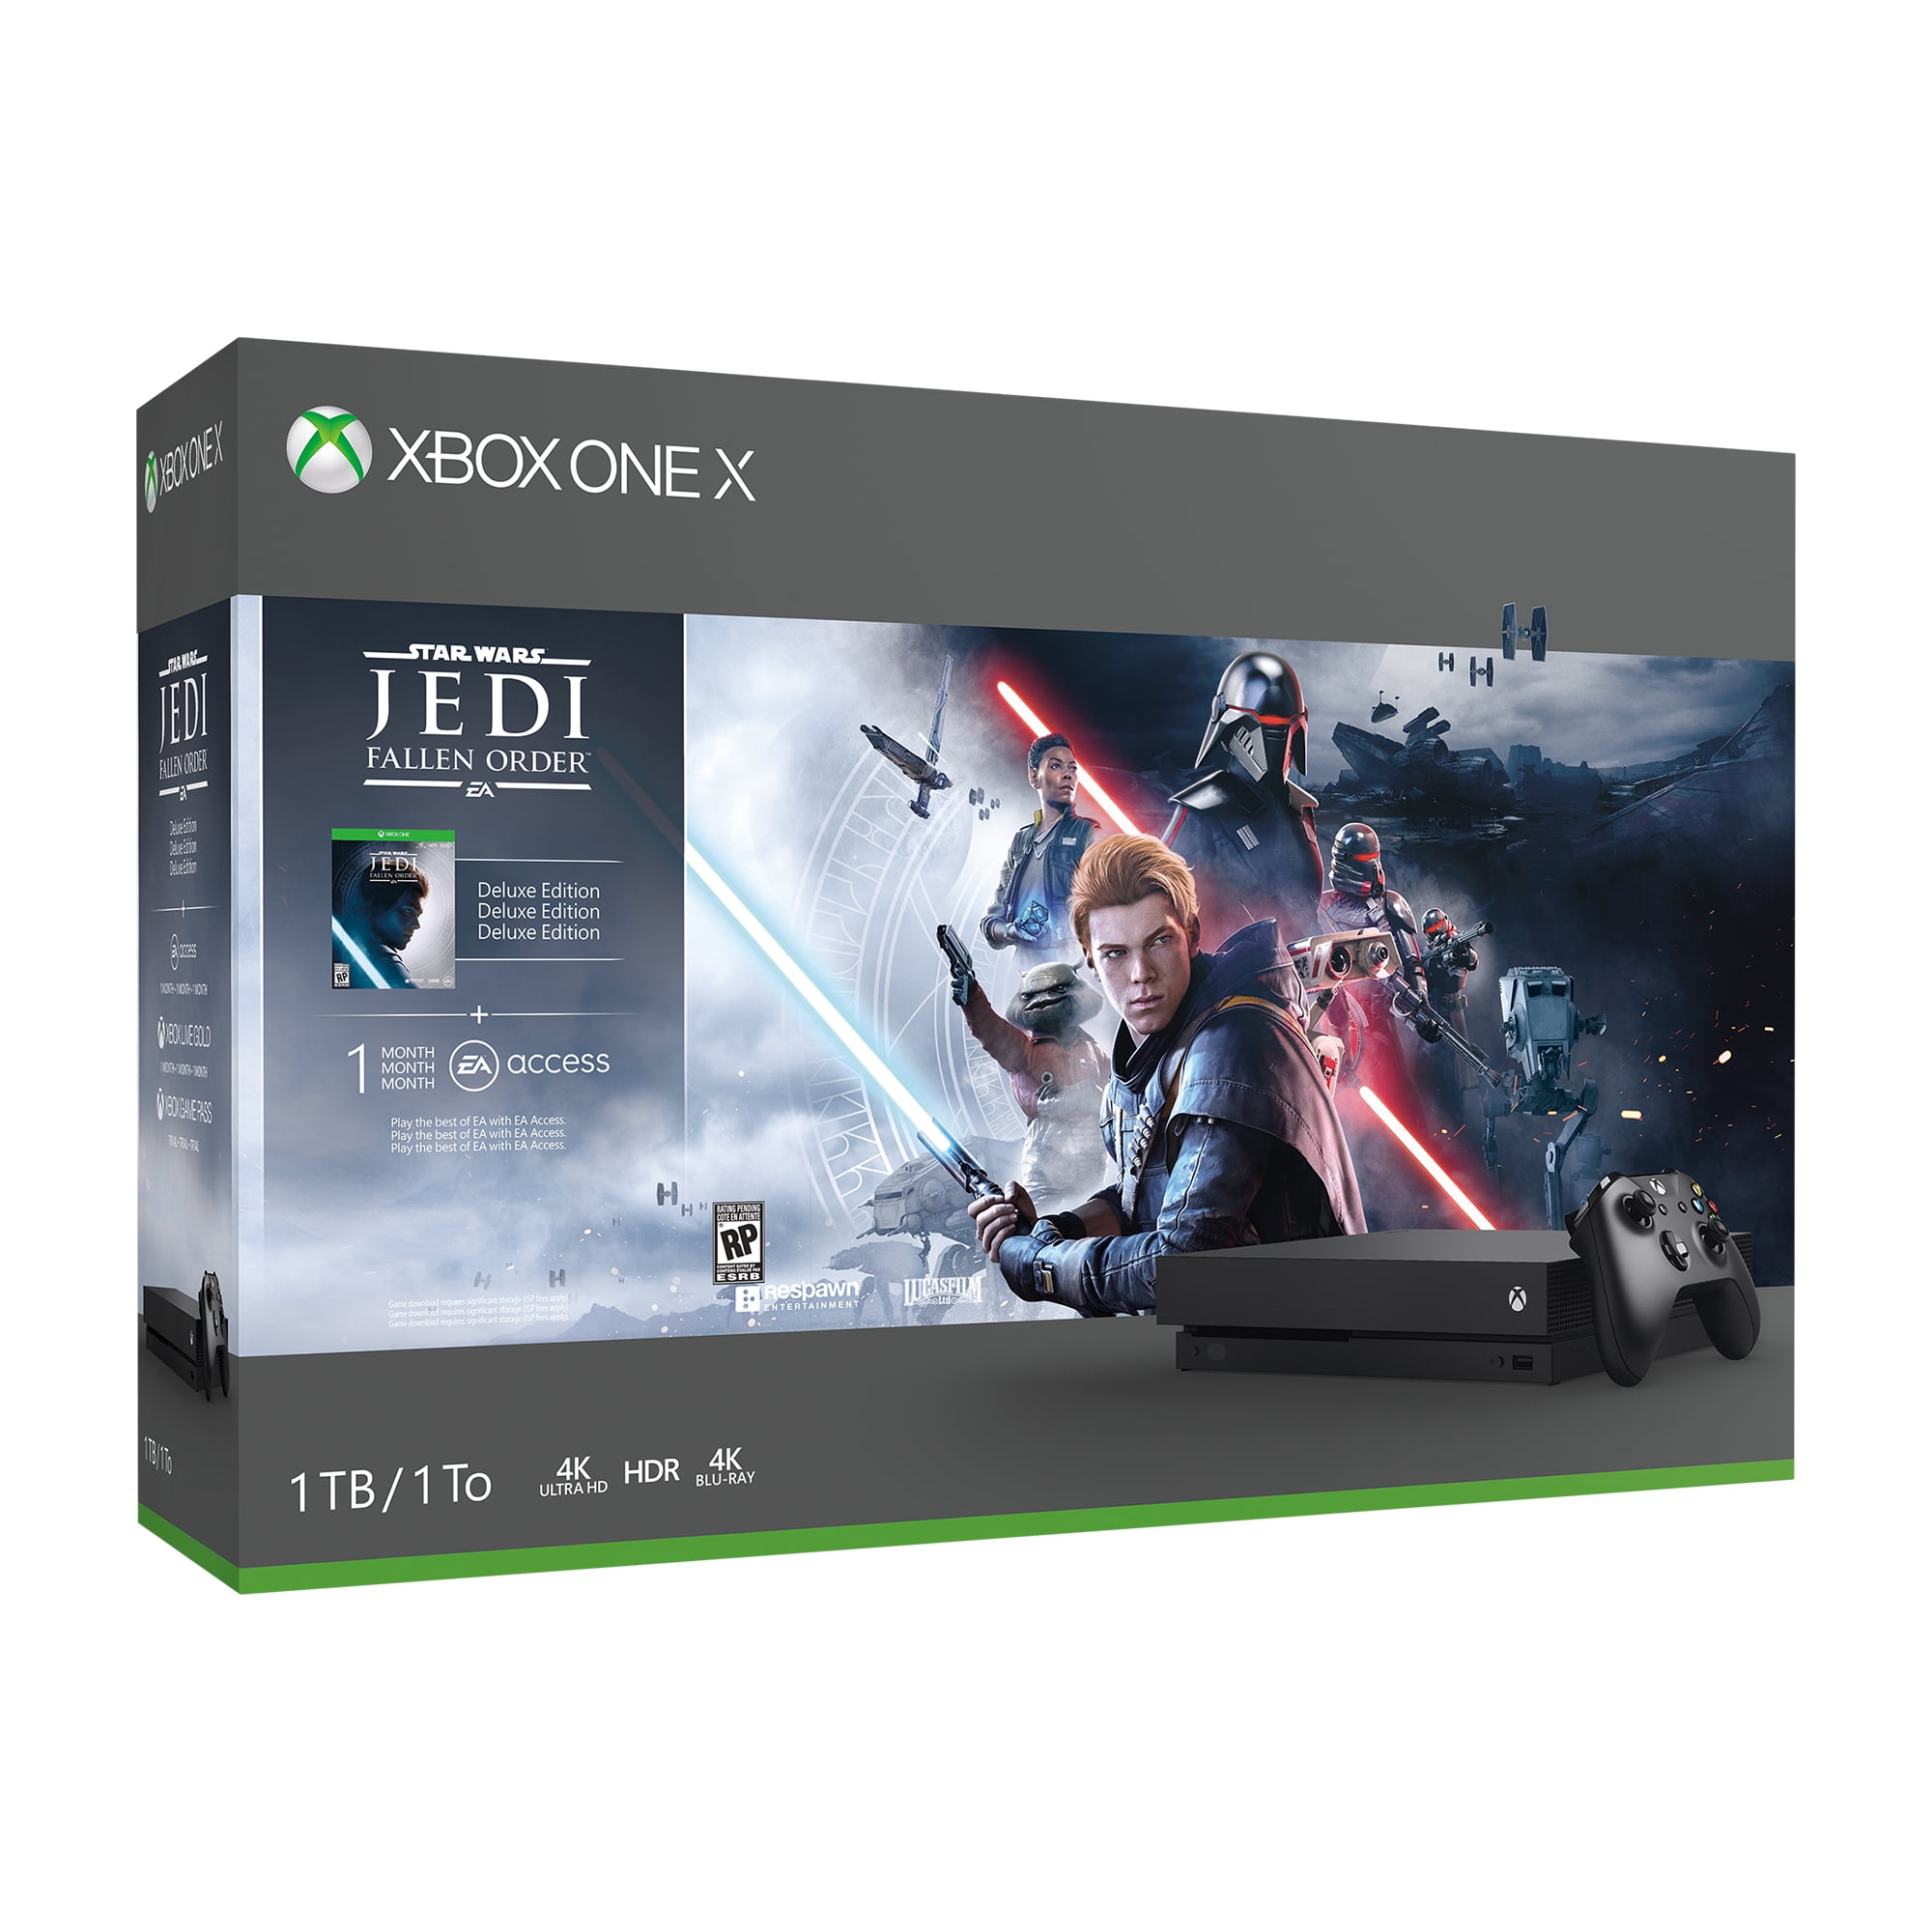 Microsoft Xbox One X 1TB SSD Star Wars Jedi: Fallen Order Deluxe Edition Console Bundle, with 1 Month Live Gold and Game Pass - 1TB Solid State Drive Enhanced - Walmart.com